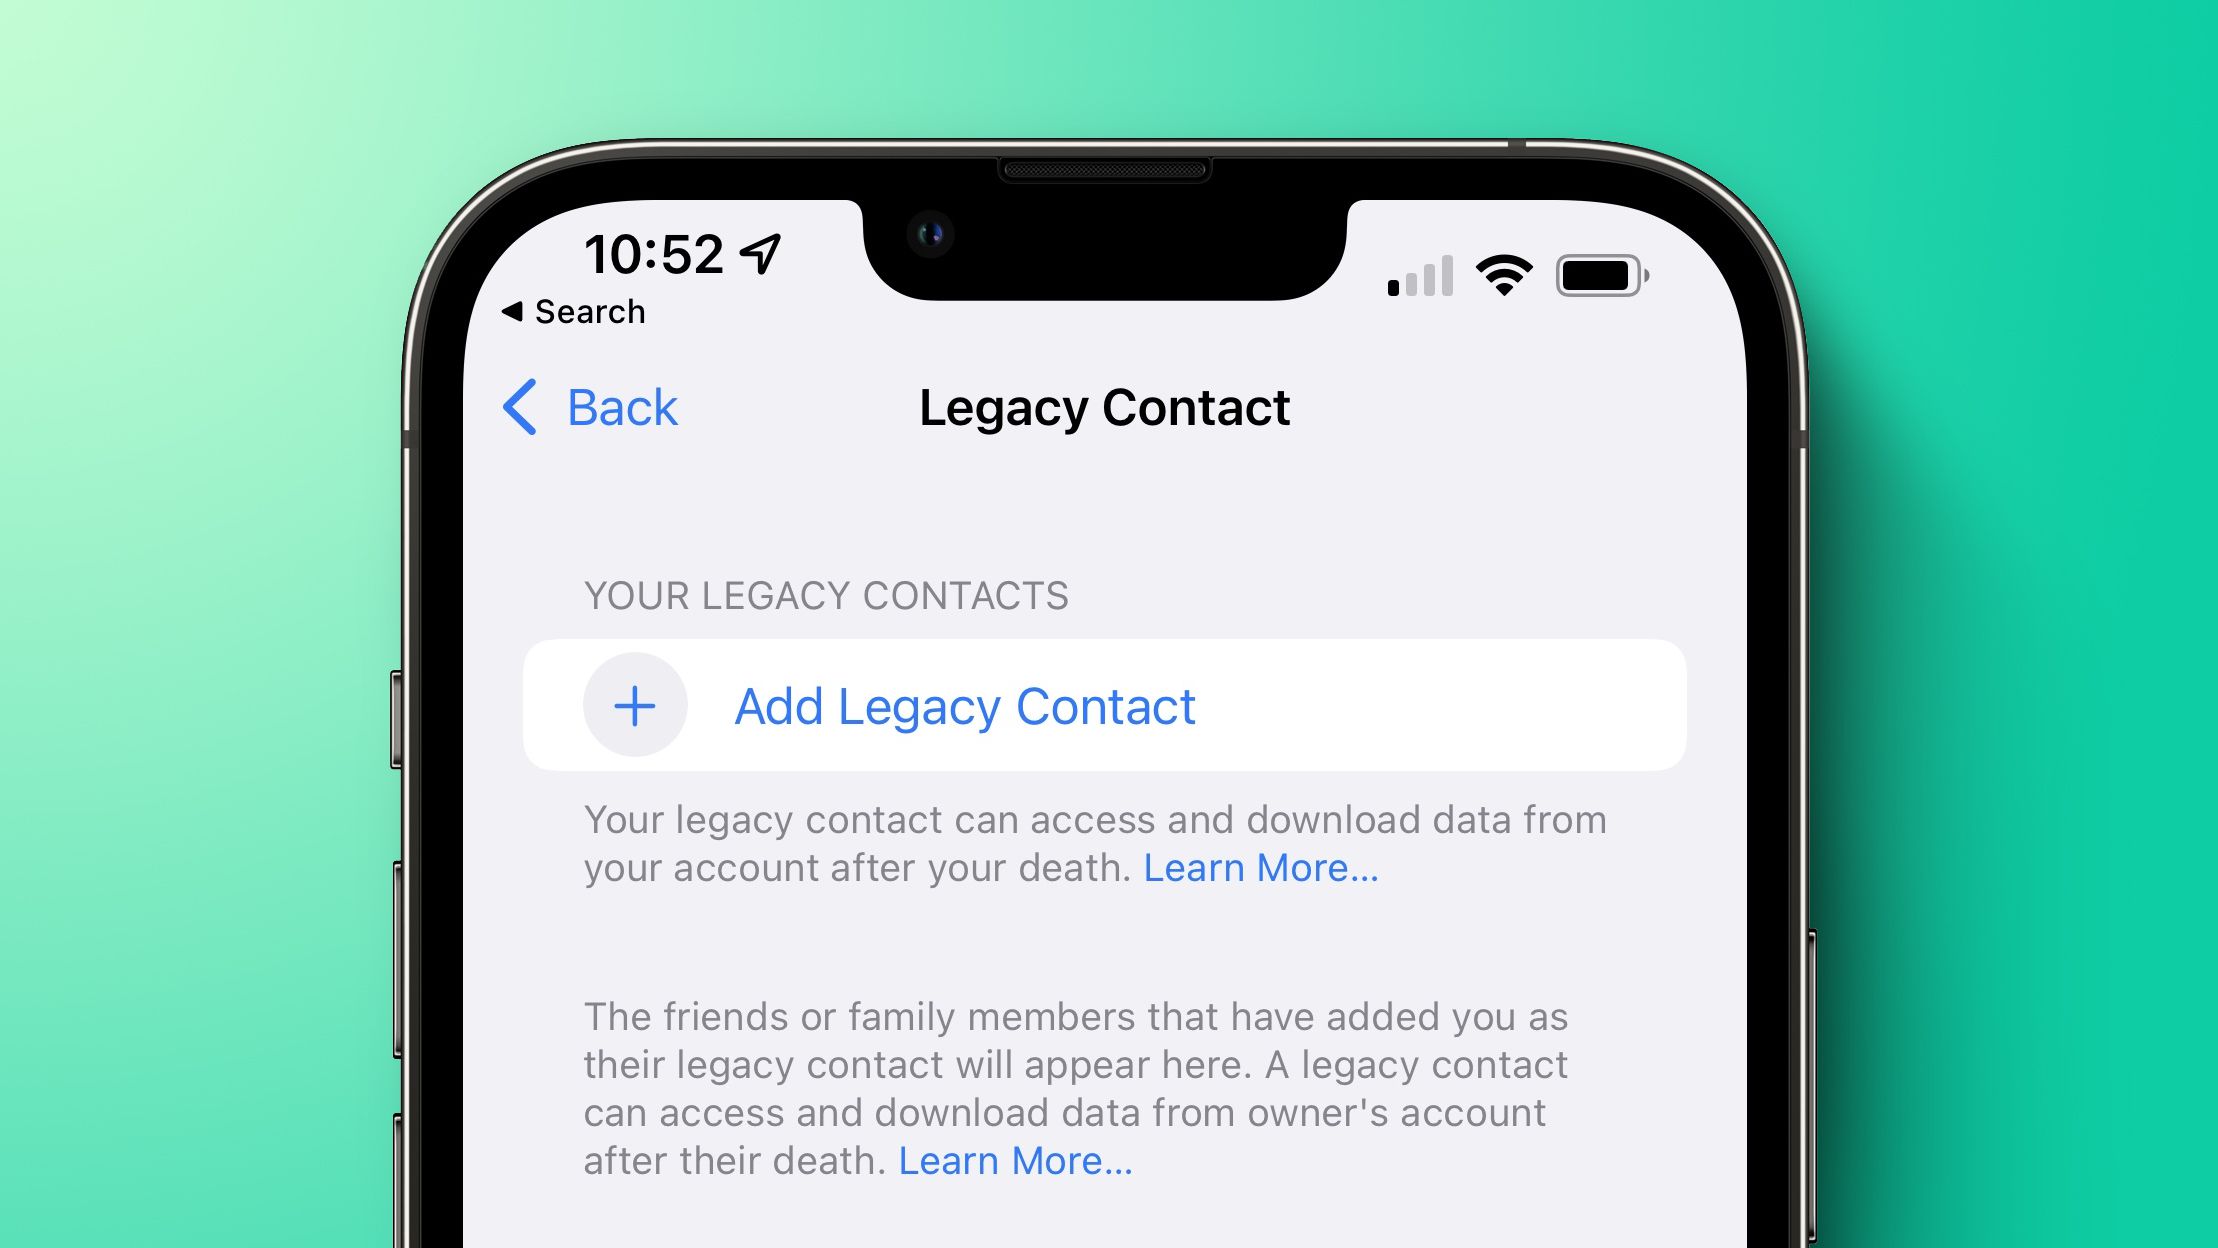 How to Use Apple's Legacy Contact Feature to Let Your Family Access Your Photos and Data After You Die